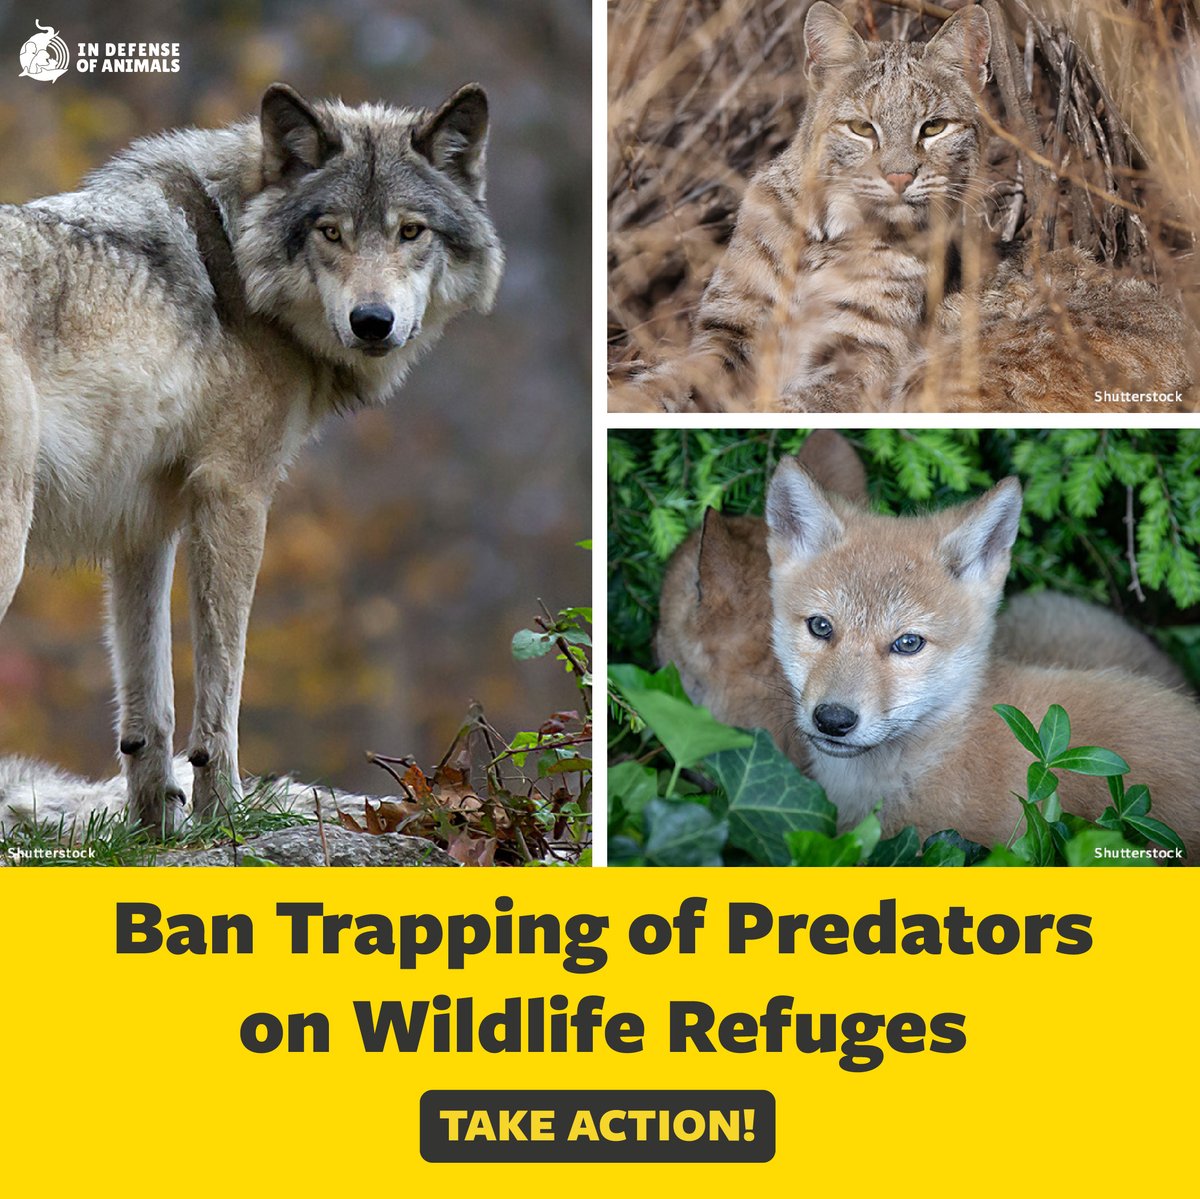 Tell #USFWS to #BanTrapping as a part of its rule to maintain biological integrity, diversity, and environmental health on #WildlifeRefuges
Take action: bit.ly/3W2FuCA
Pls RT and support our work: bit.ly/3W6Rint